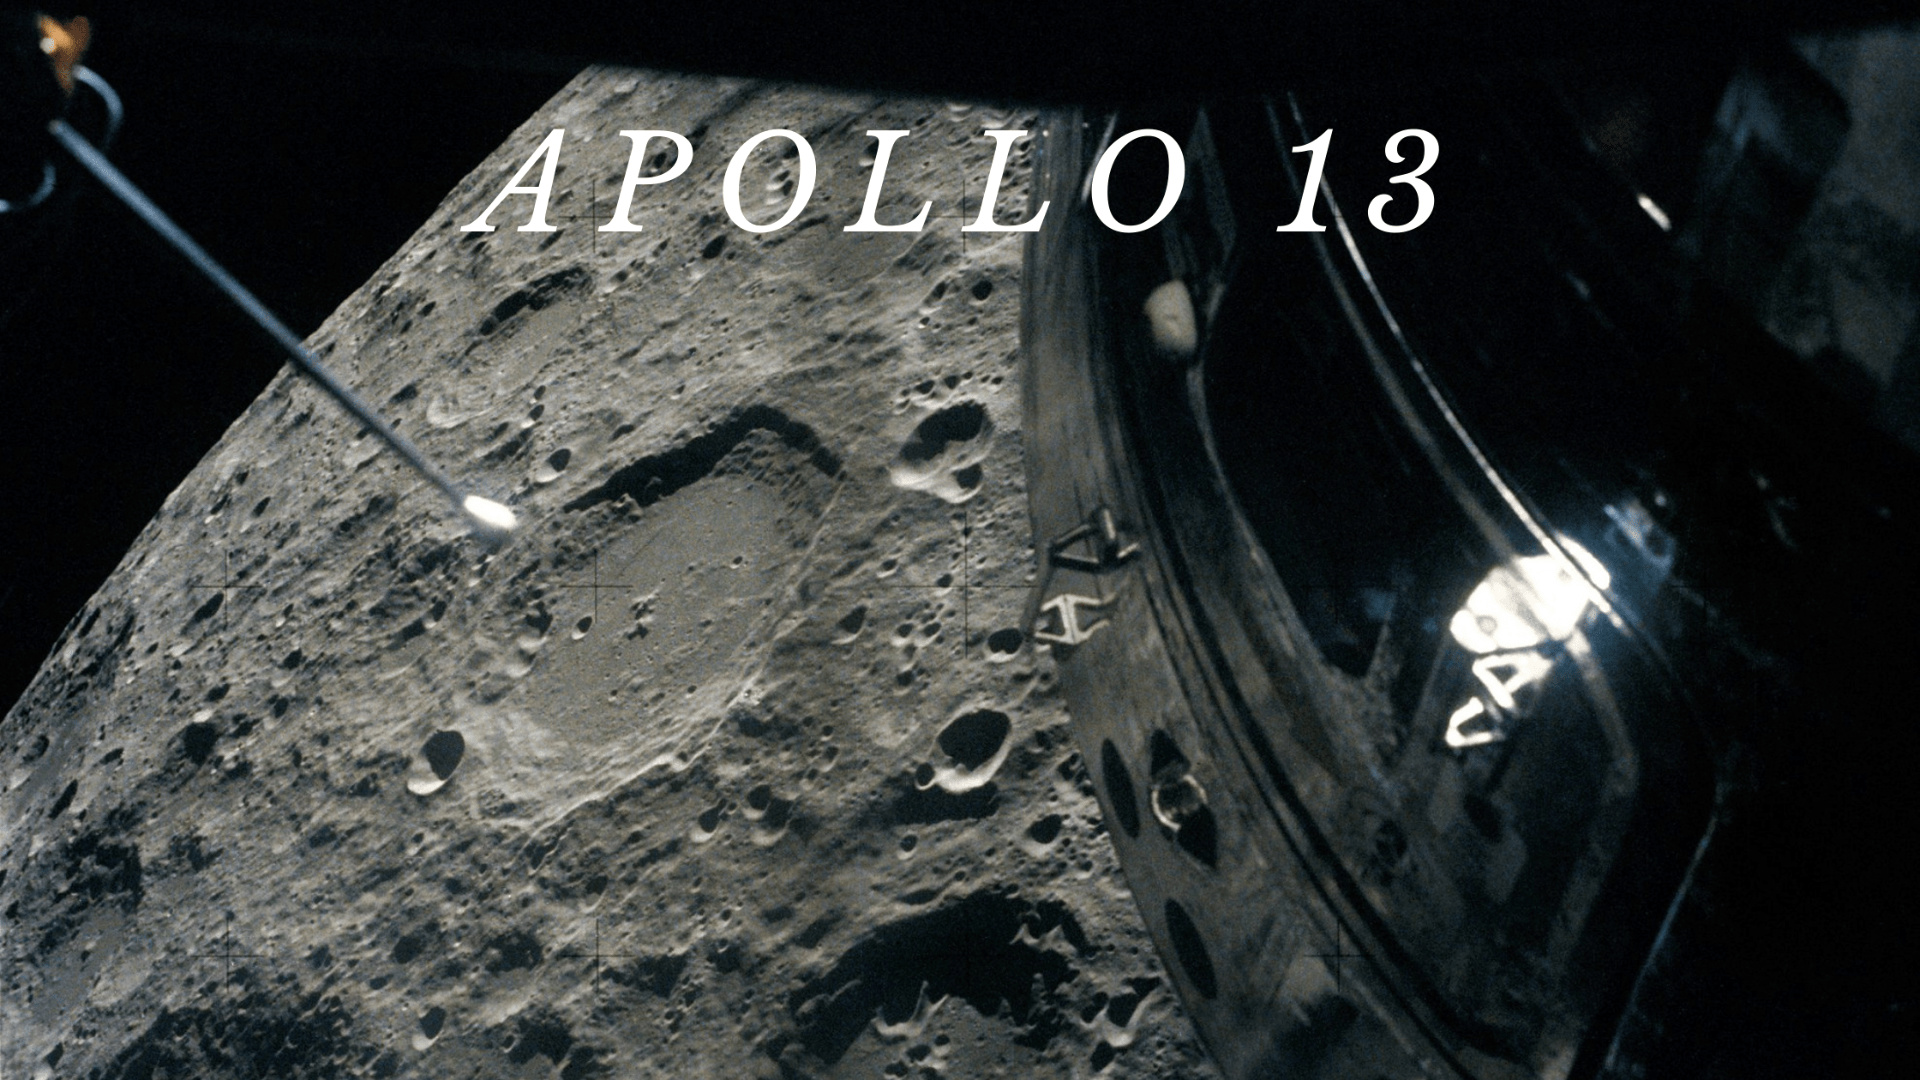 Apollo 13, Space collective tribute, Astronaut's resilience, Mission survival, 1920x1080 Full HD Desktop